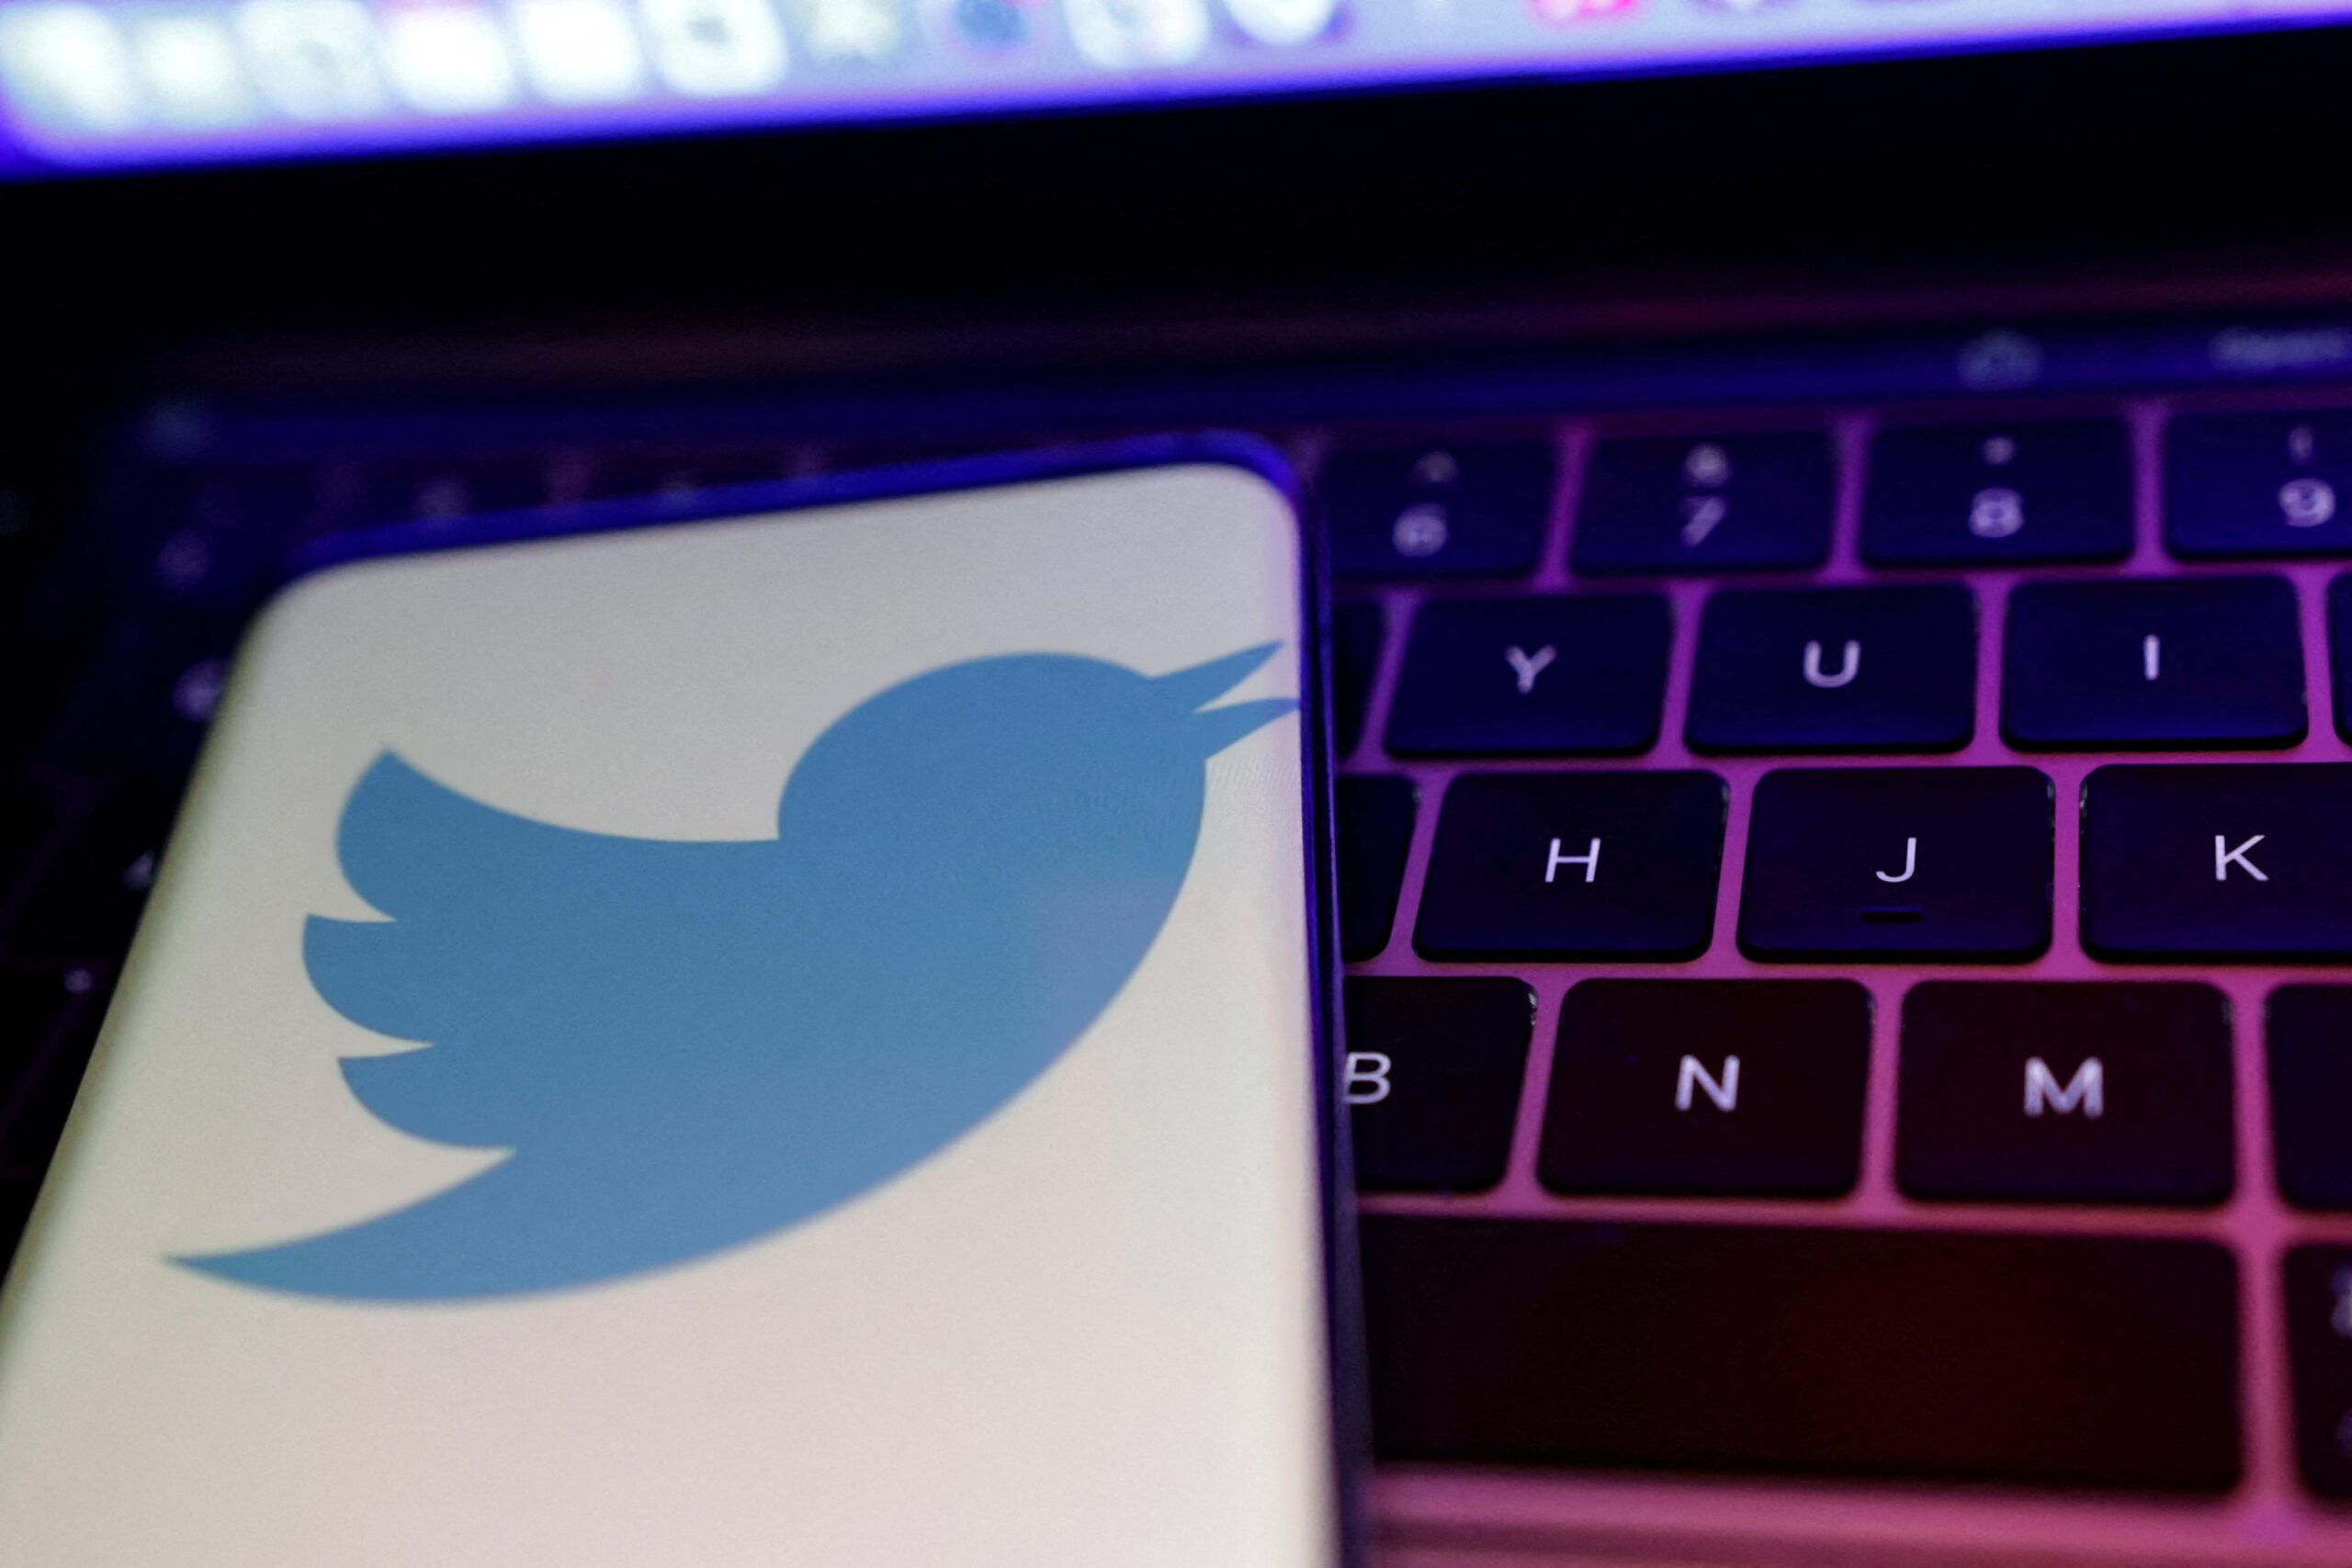 Did Twitter ignore basic security measures? An expert explains a whistleblower’s claims